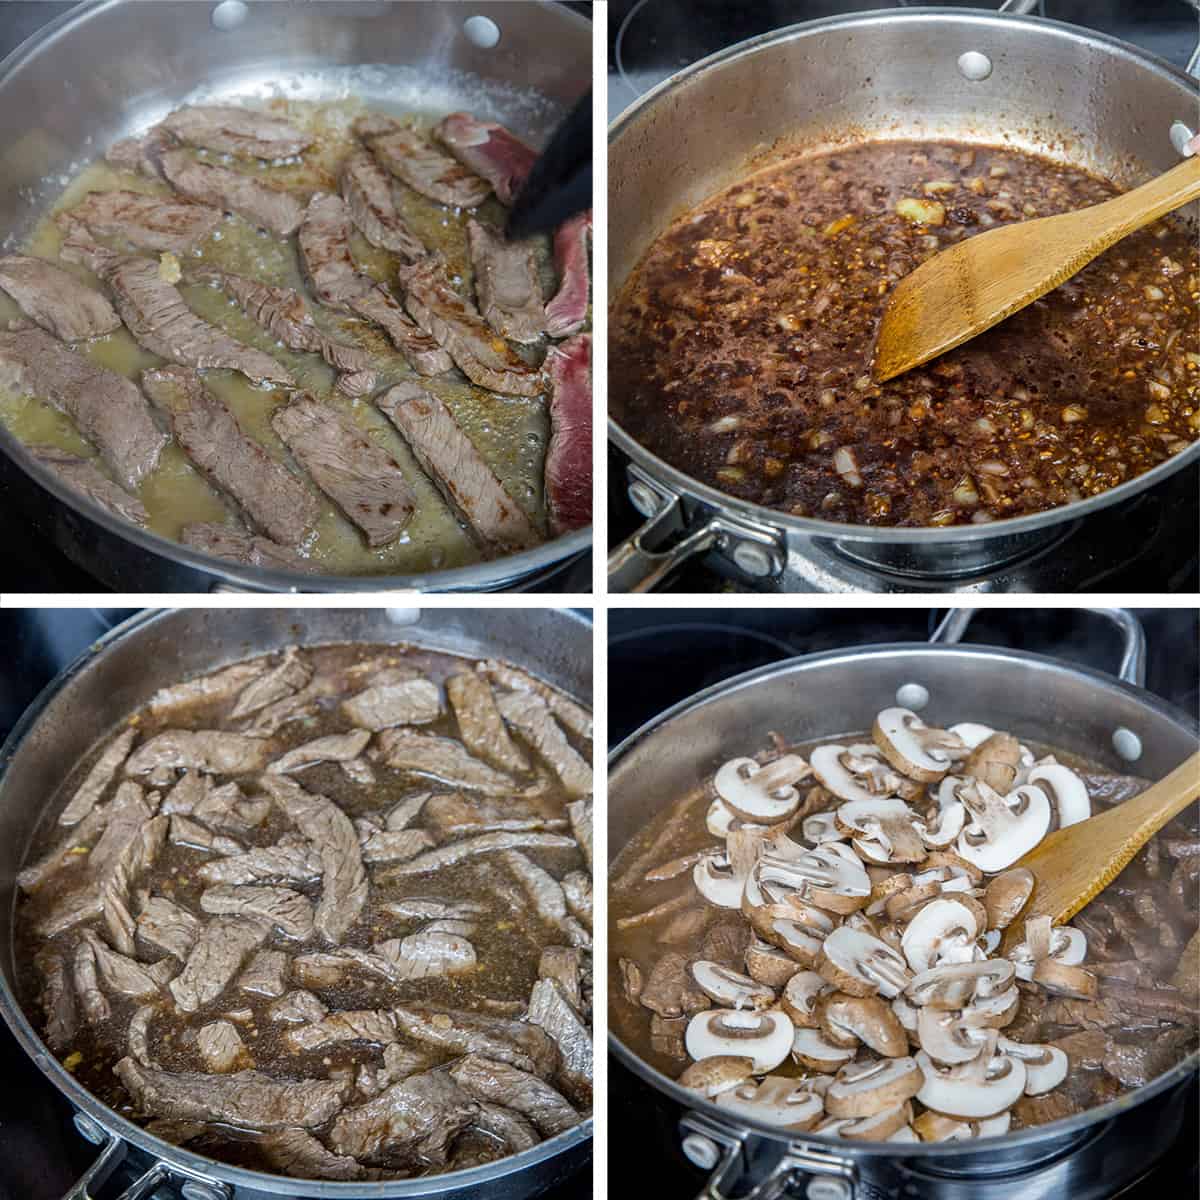 Four images showing beef cooking in a skillet with onions, wine, broth, and mushrooms.